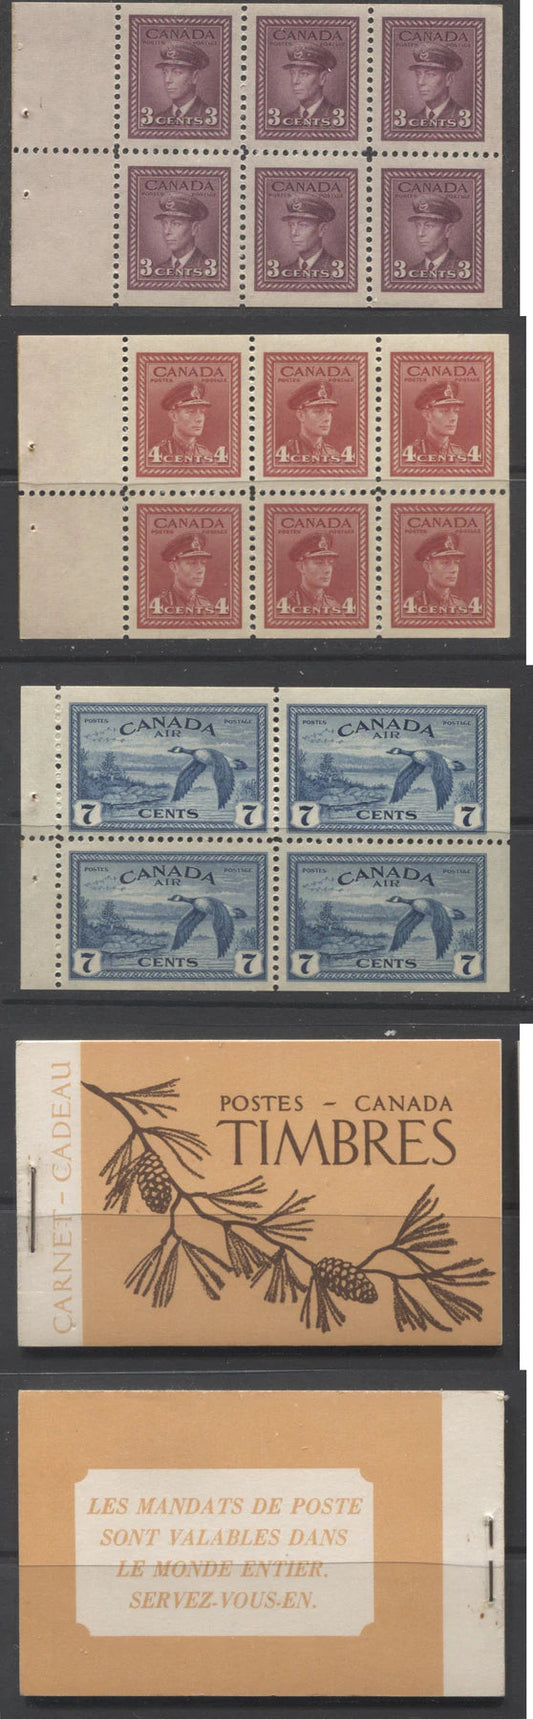 Lot 297 Canada #BK39a (McCann #39b) 1942-1949 War Issue Complete $1.00 French, Booklet Containing 1 Pane Each of 6 of 3c and 4c Plus 2 Panes of 4 7c Airmail Stamps, 14 mm Staple